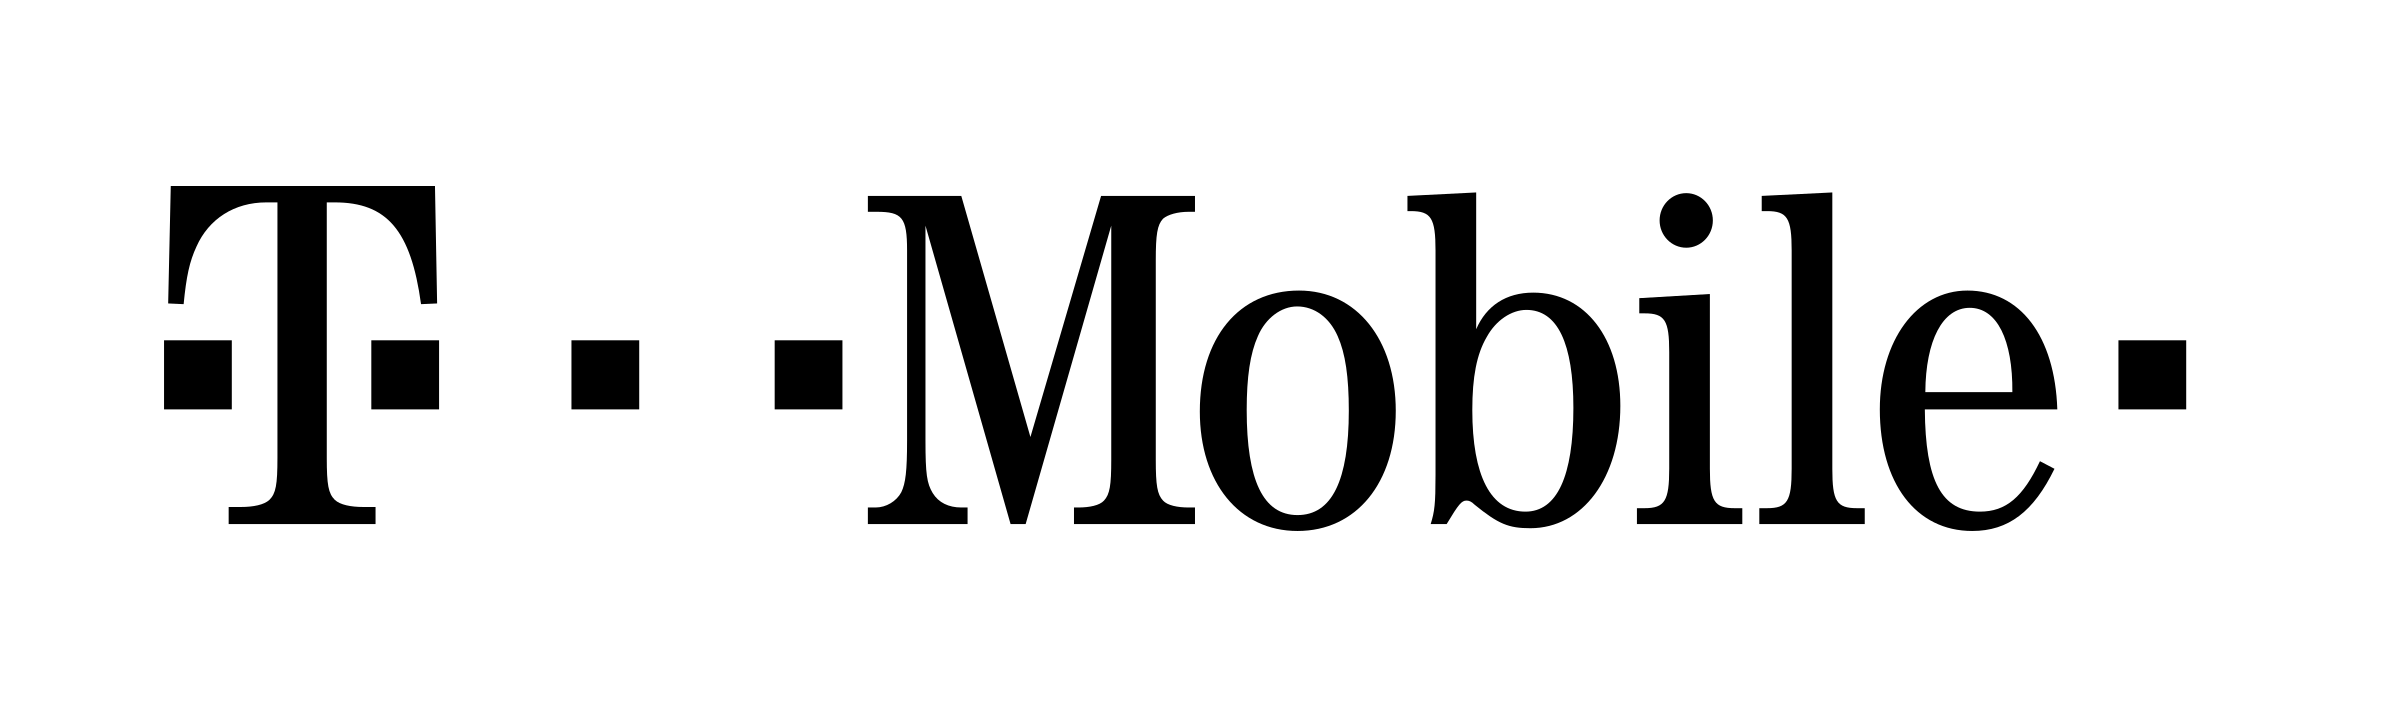 t-mobile-logo-black-and-white.png